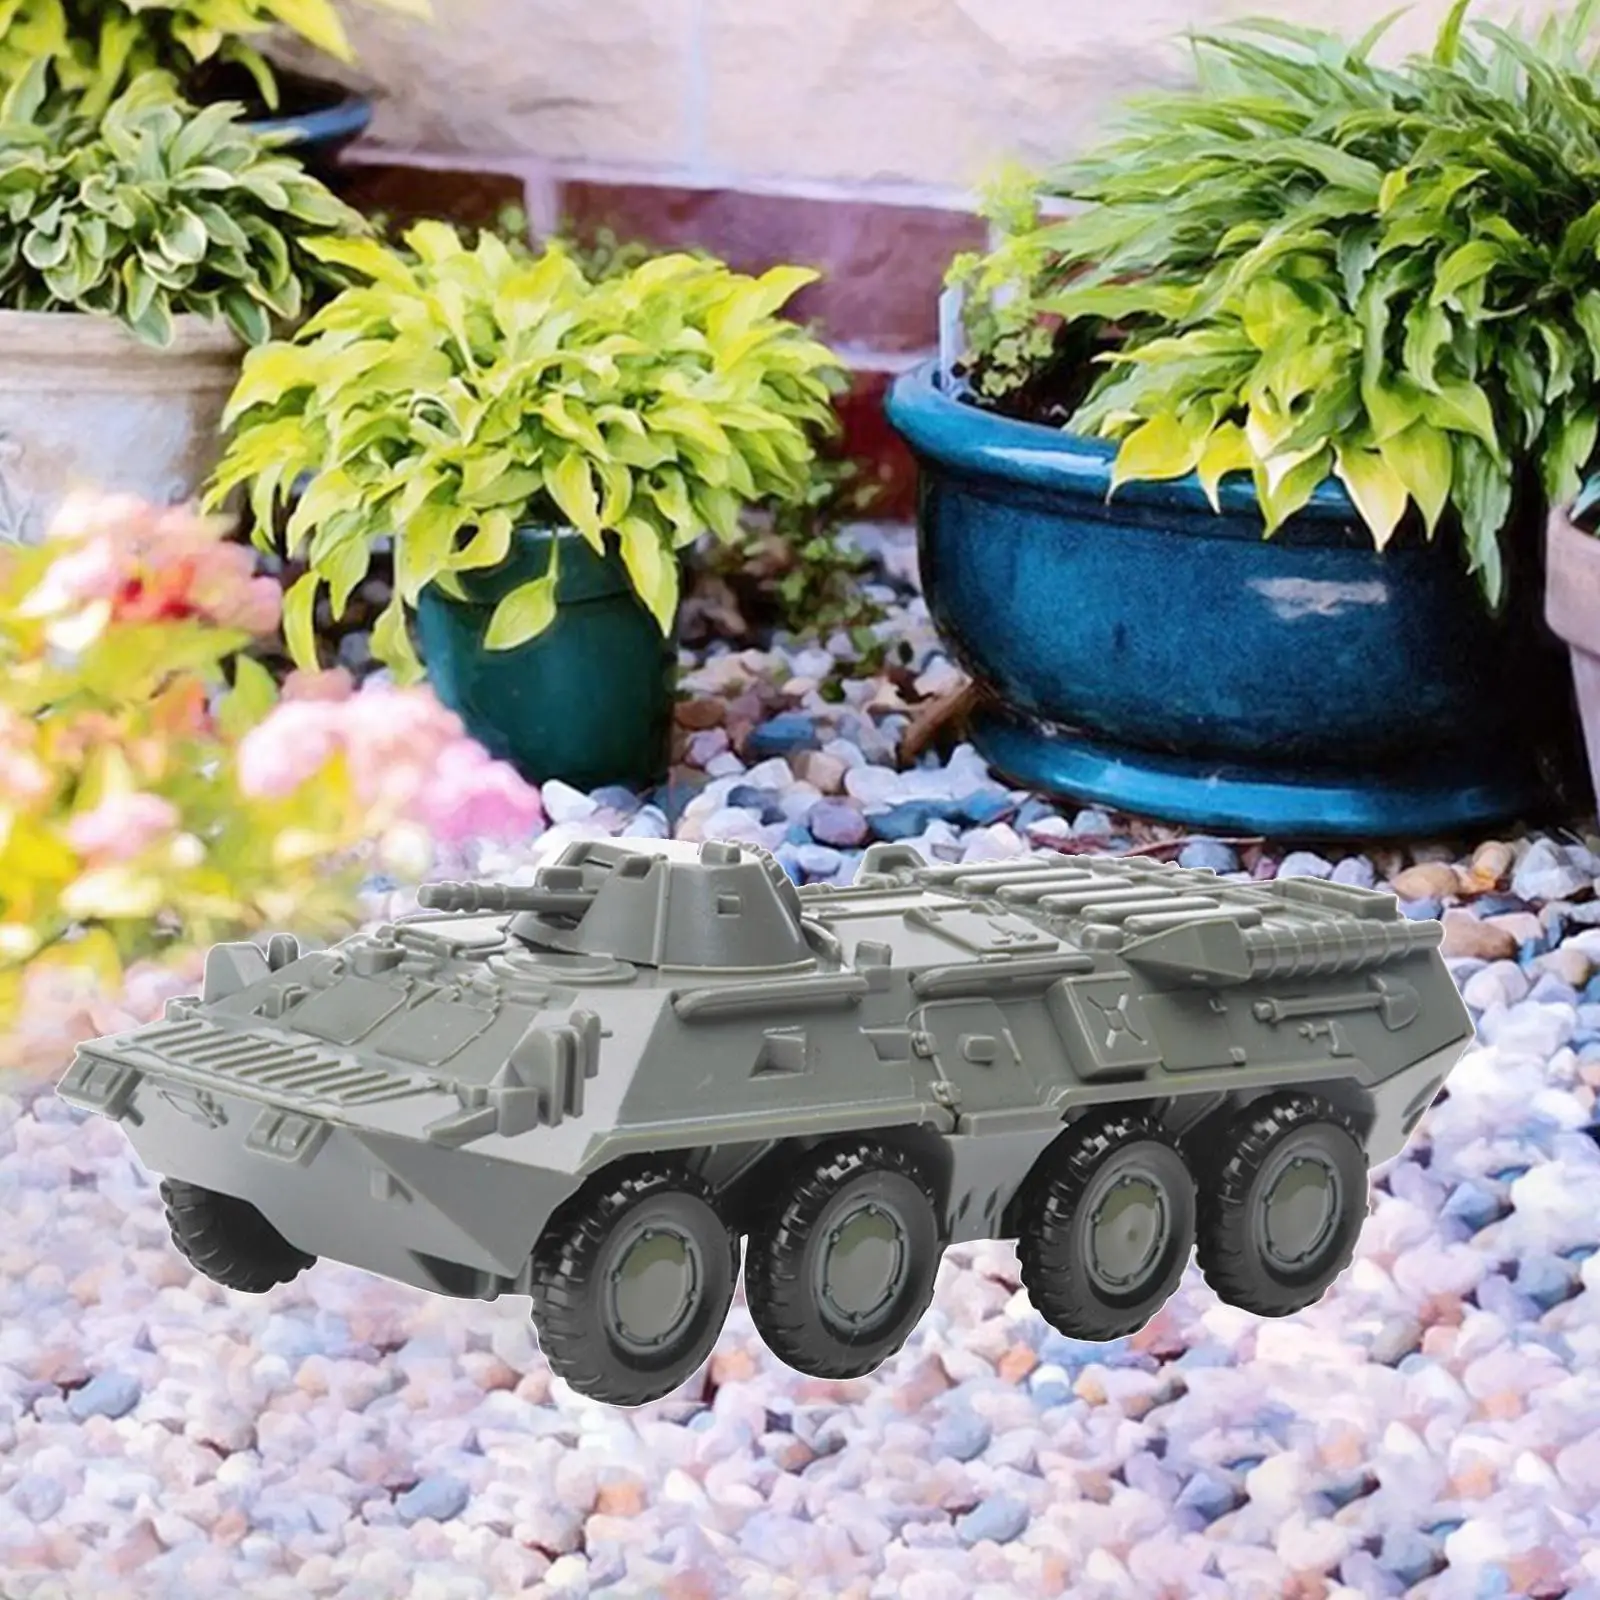 4D Model 1:72 Armoured Reconnaissance Vehicle Educational Toy